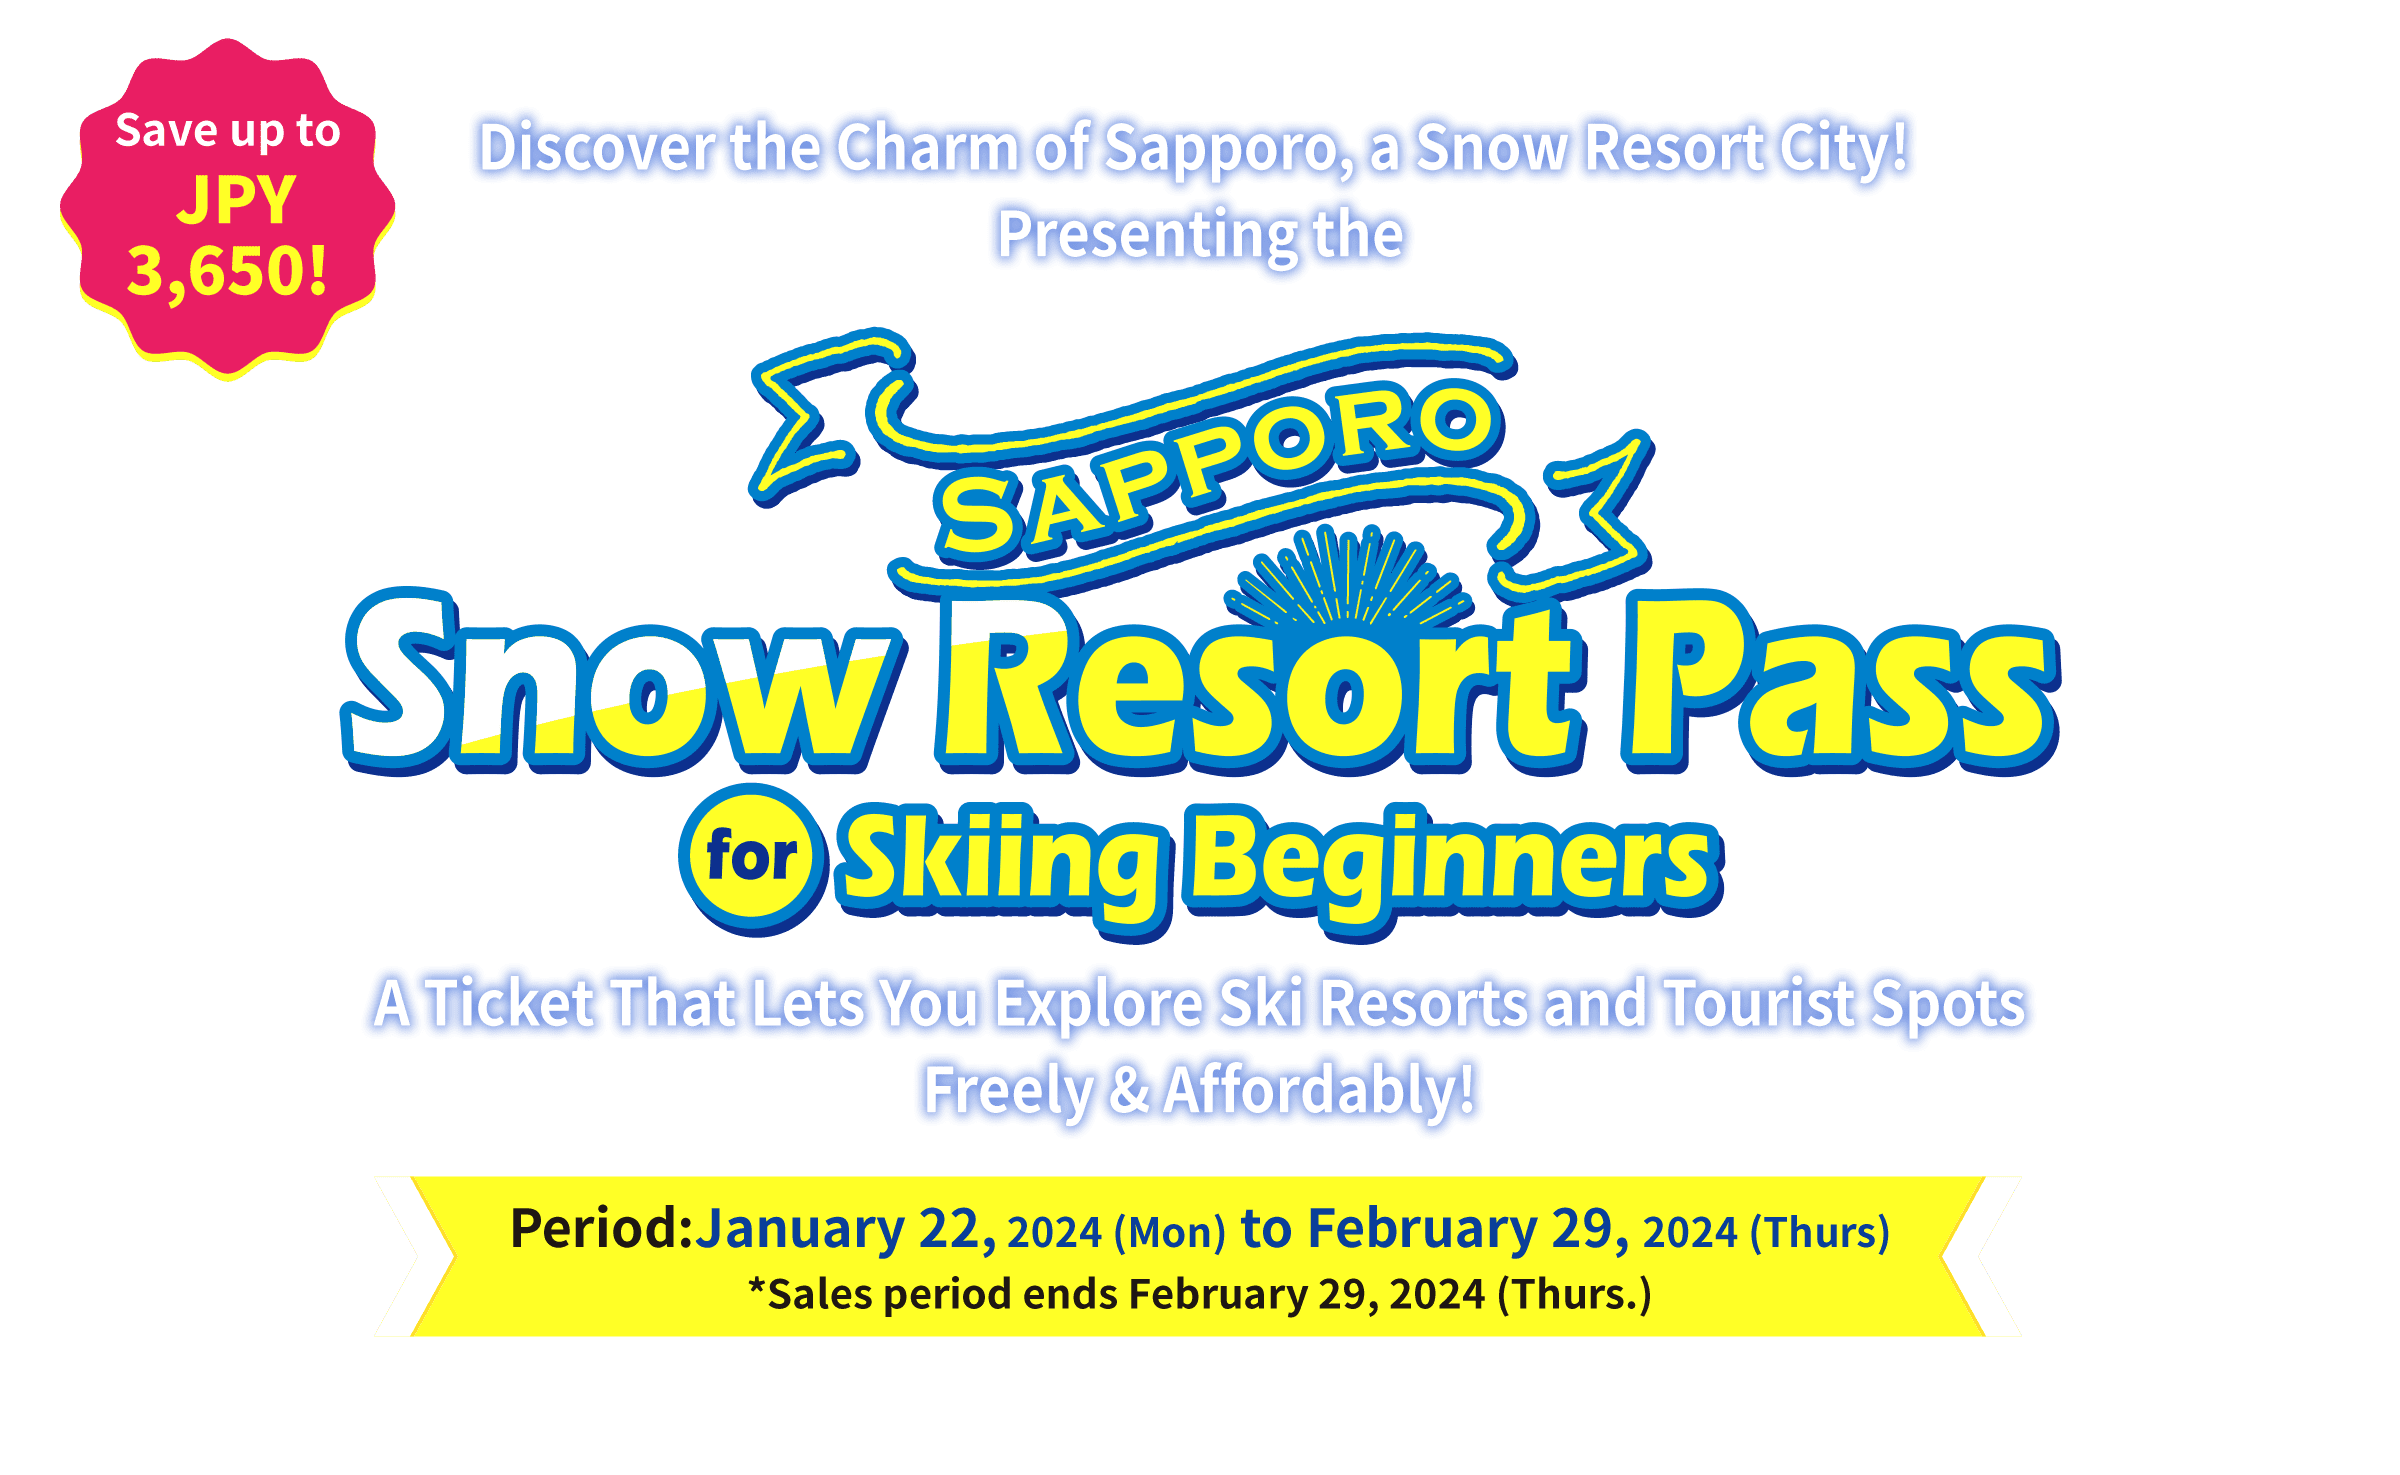 A new must-have for travelling to Sapporo! Introducing the SAPPORO SNOW RESORT PASS